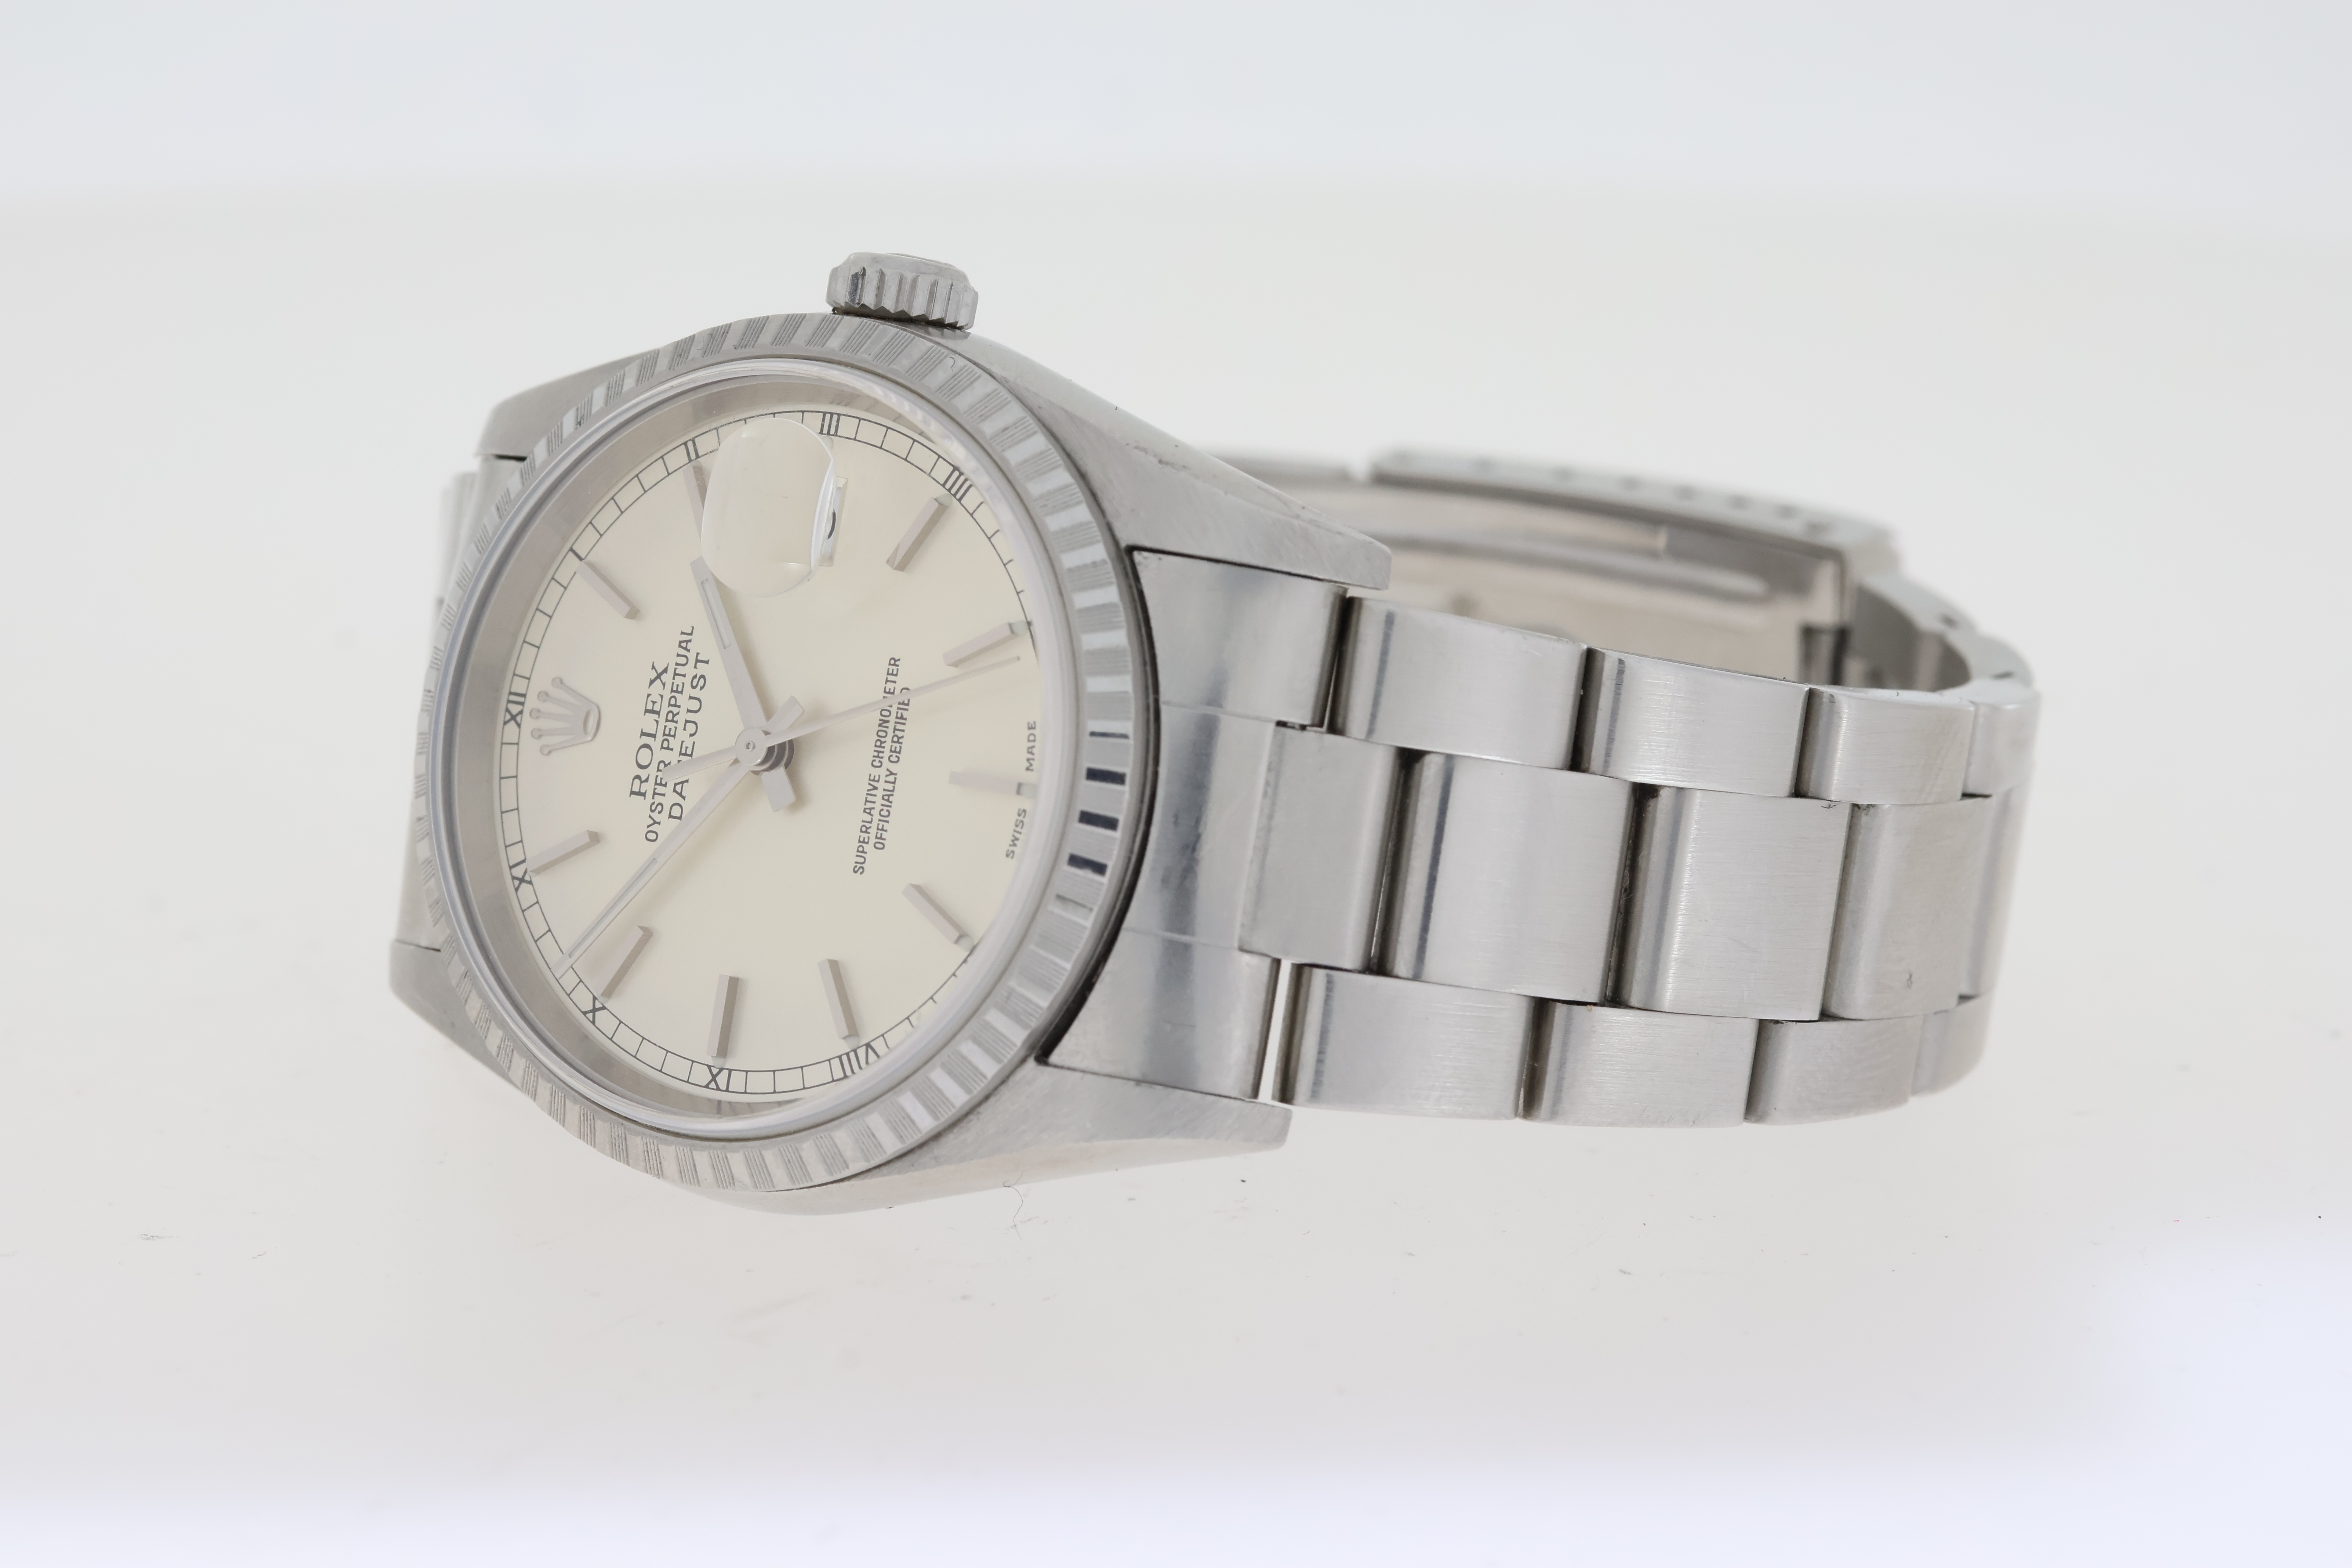 ROLEX DATEJUST 36 REFERENCE 16220 BOX AND PAPERS 2006 - Image 4 of 6